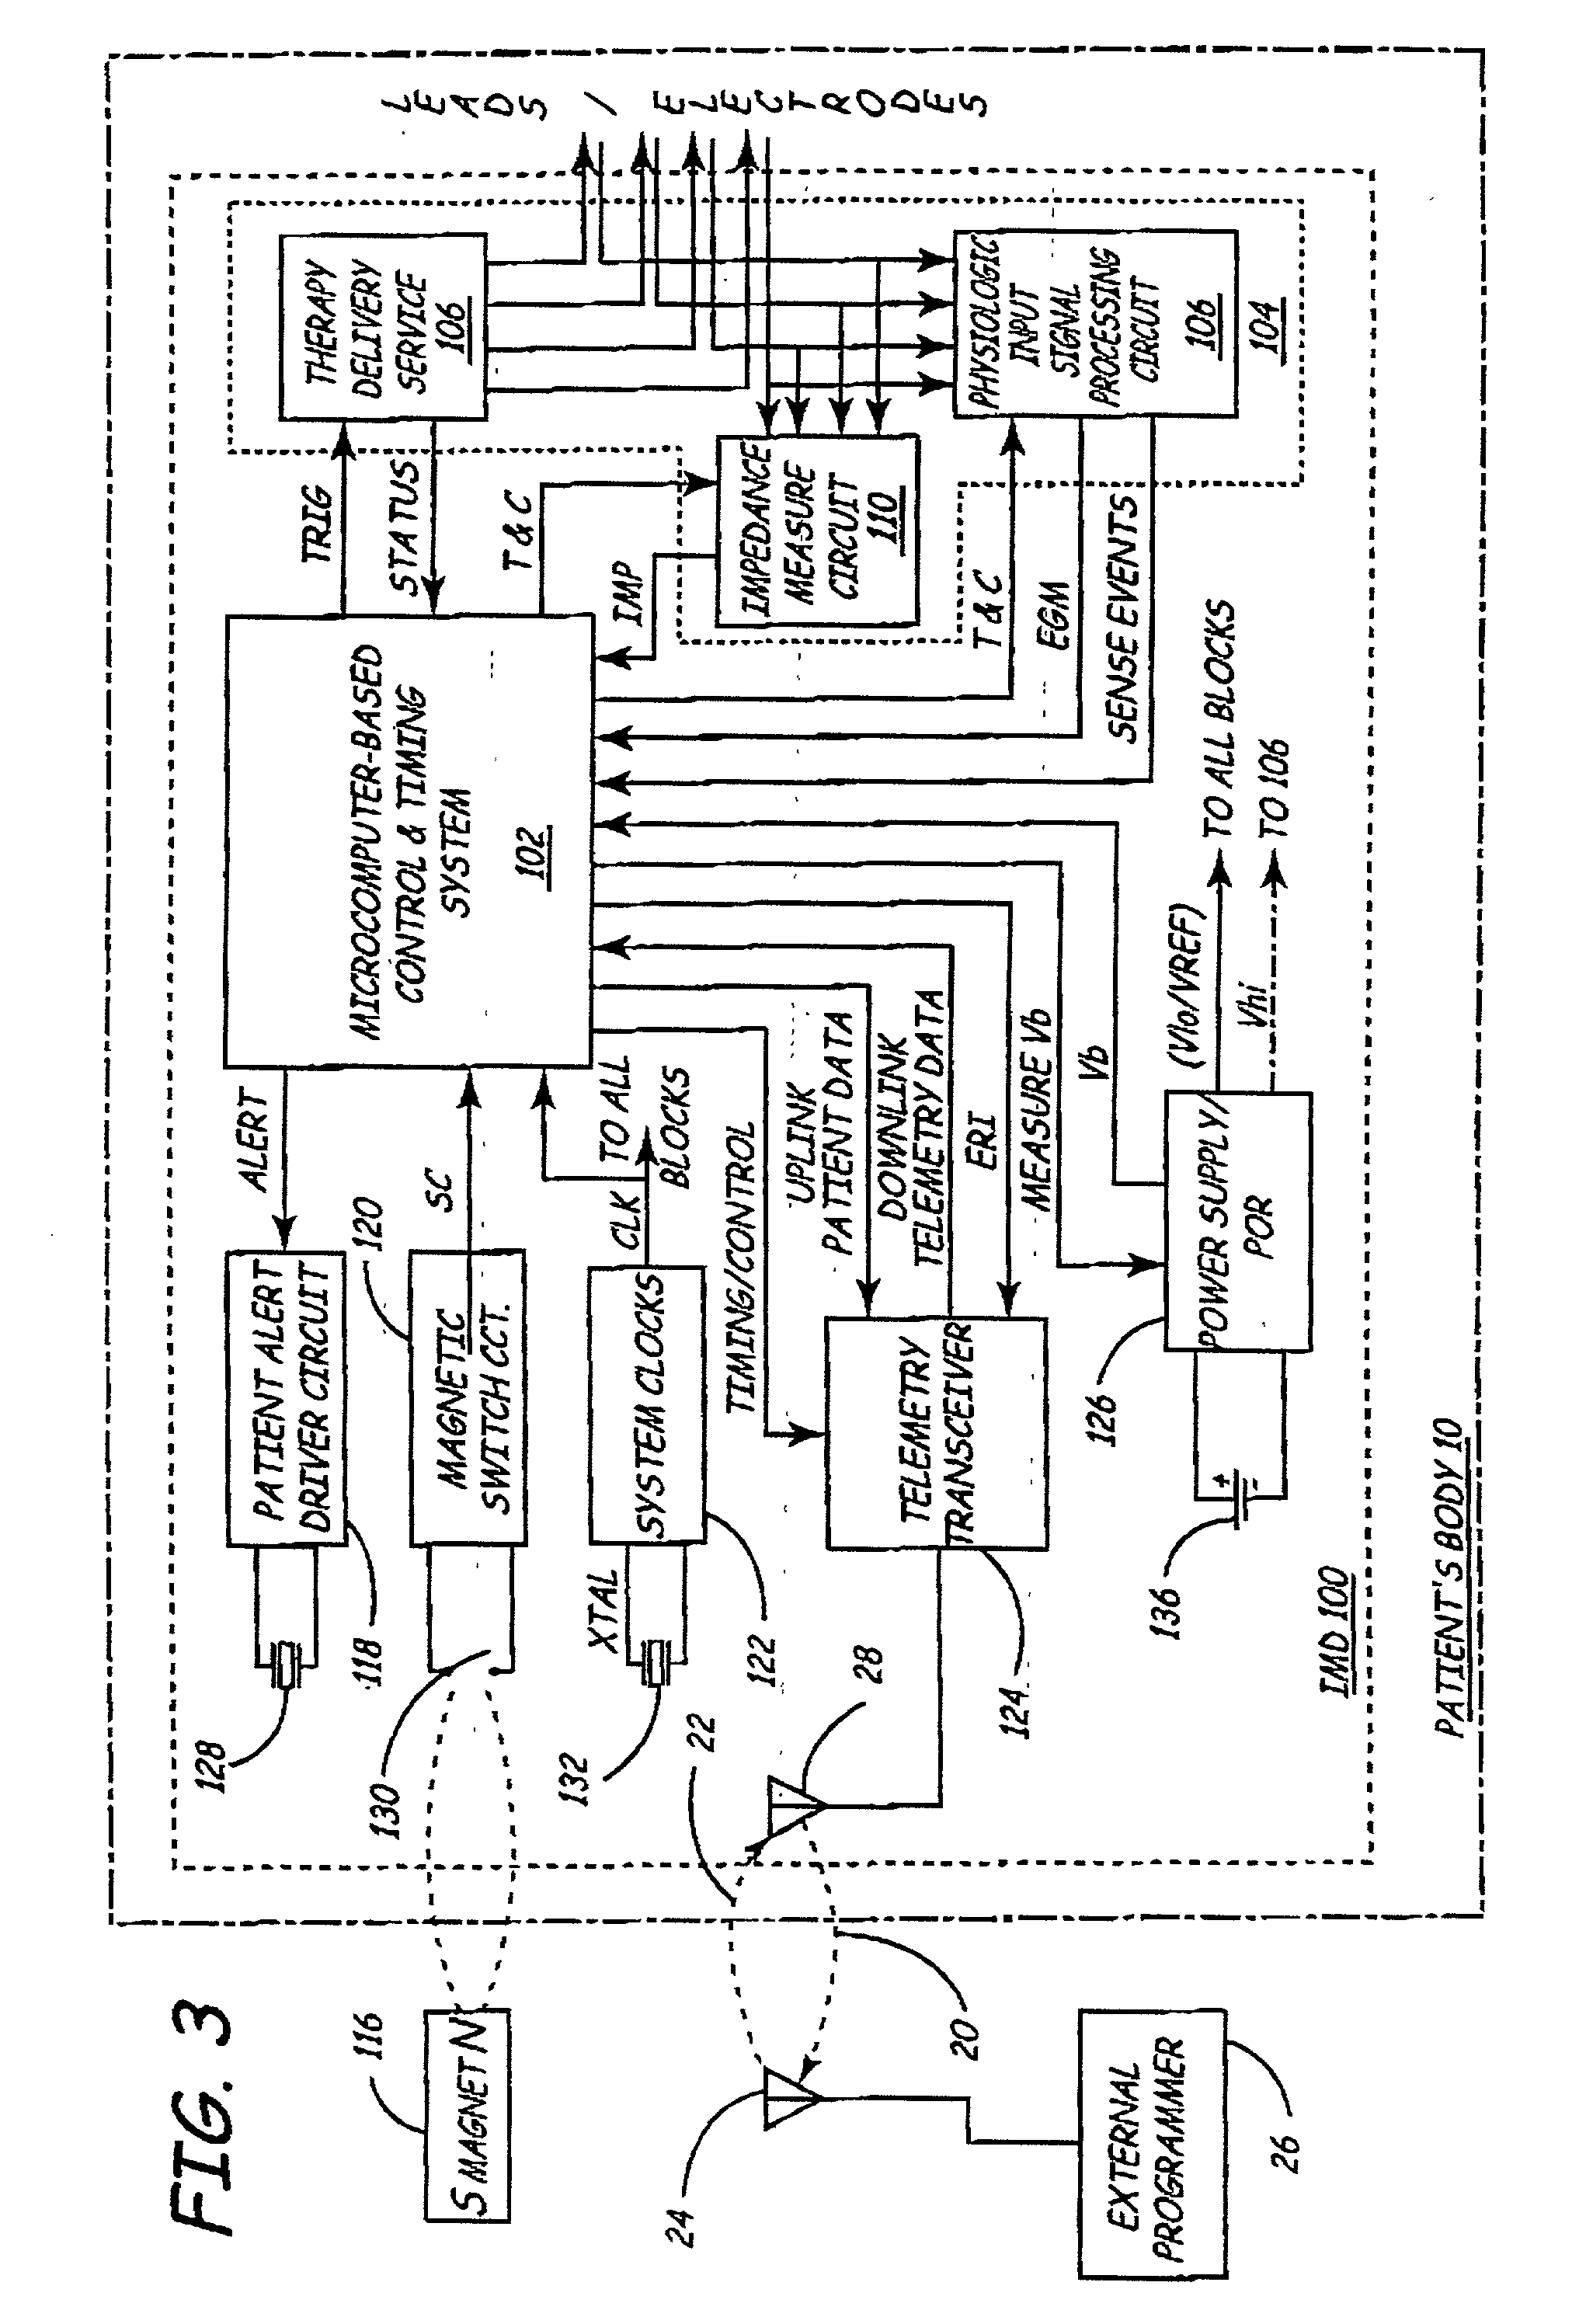 System and method for determining remaining battery life for an implantable medical device